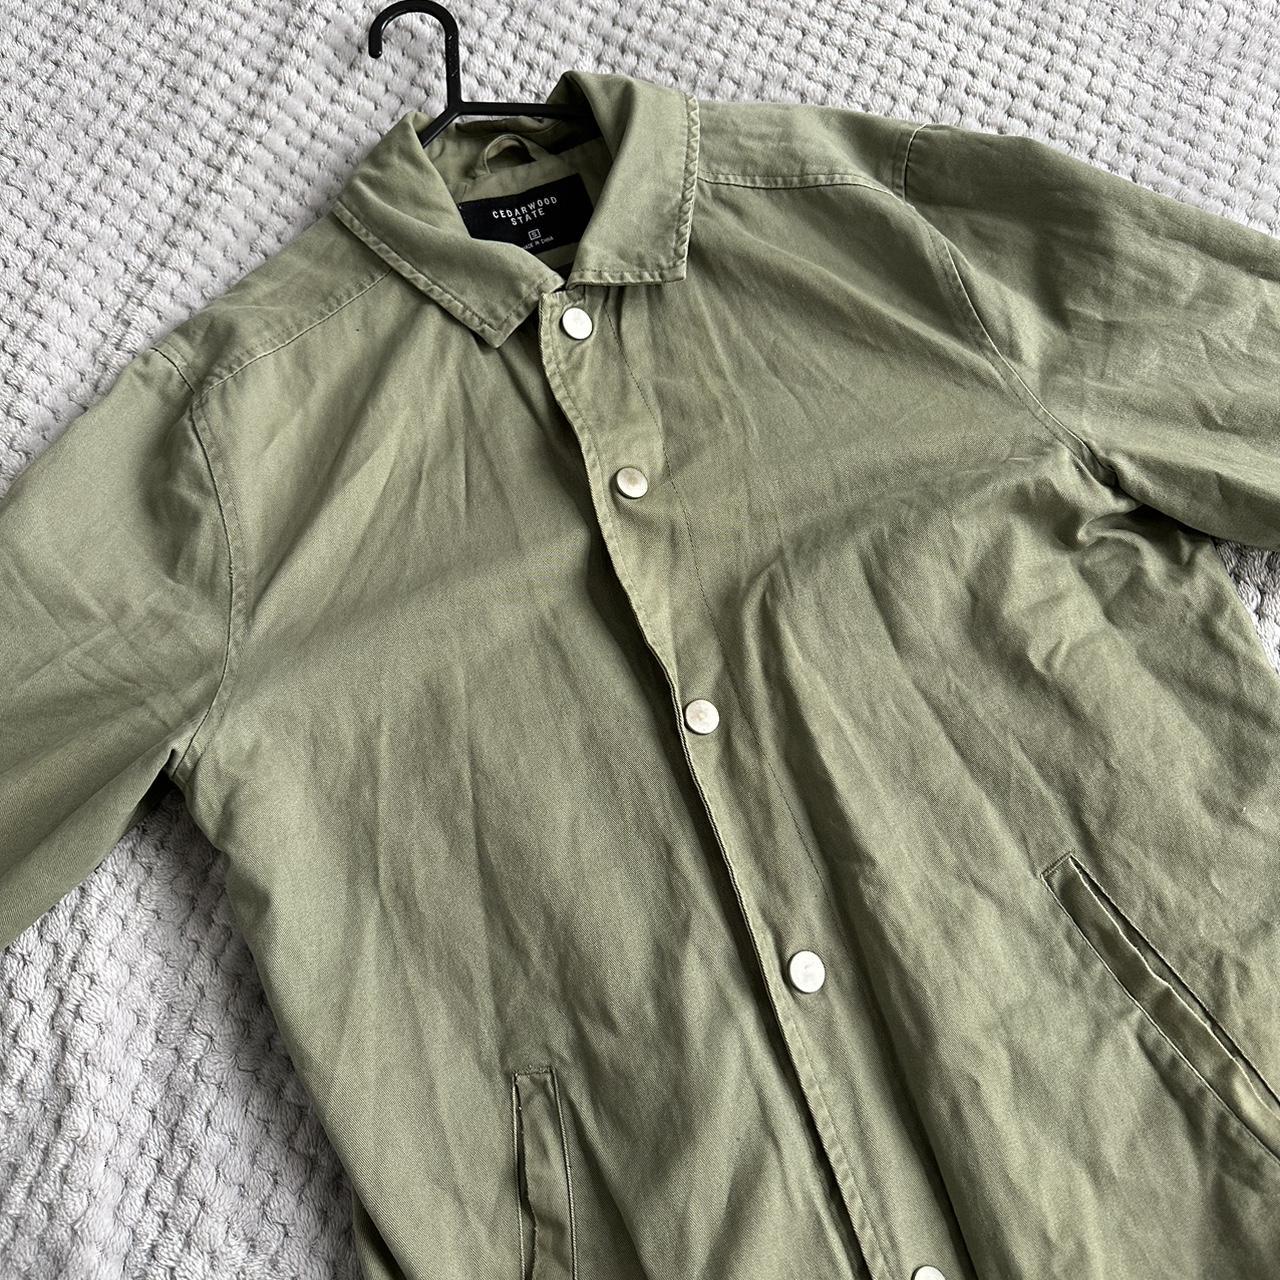 Shirt jacket with poppers - Depop